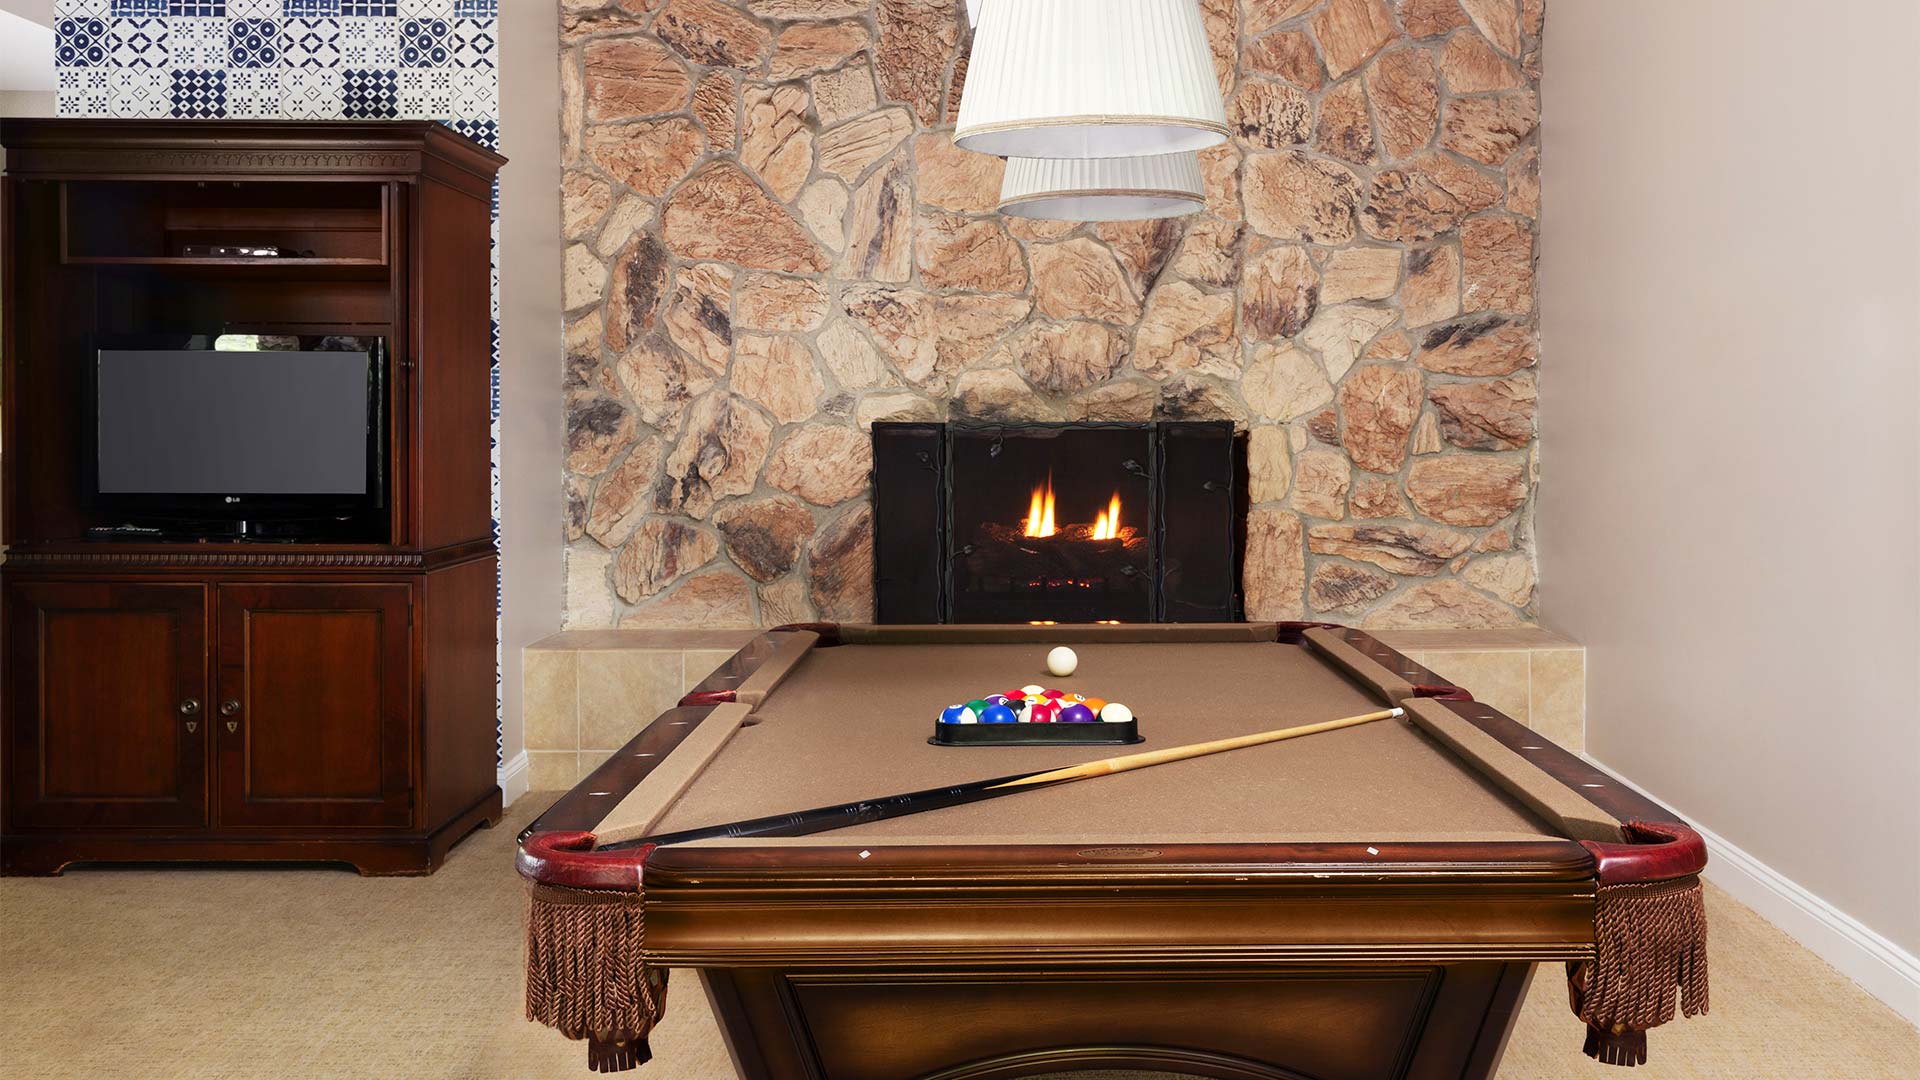 interior shot of a game room. There is a pool table with the balls set up and a pole resting on the table. There is a fireplace in the background.